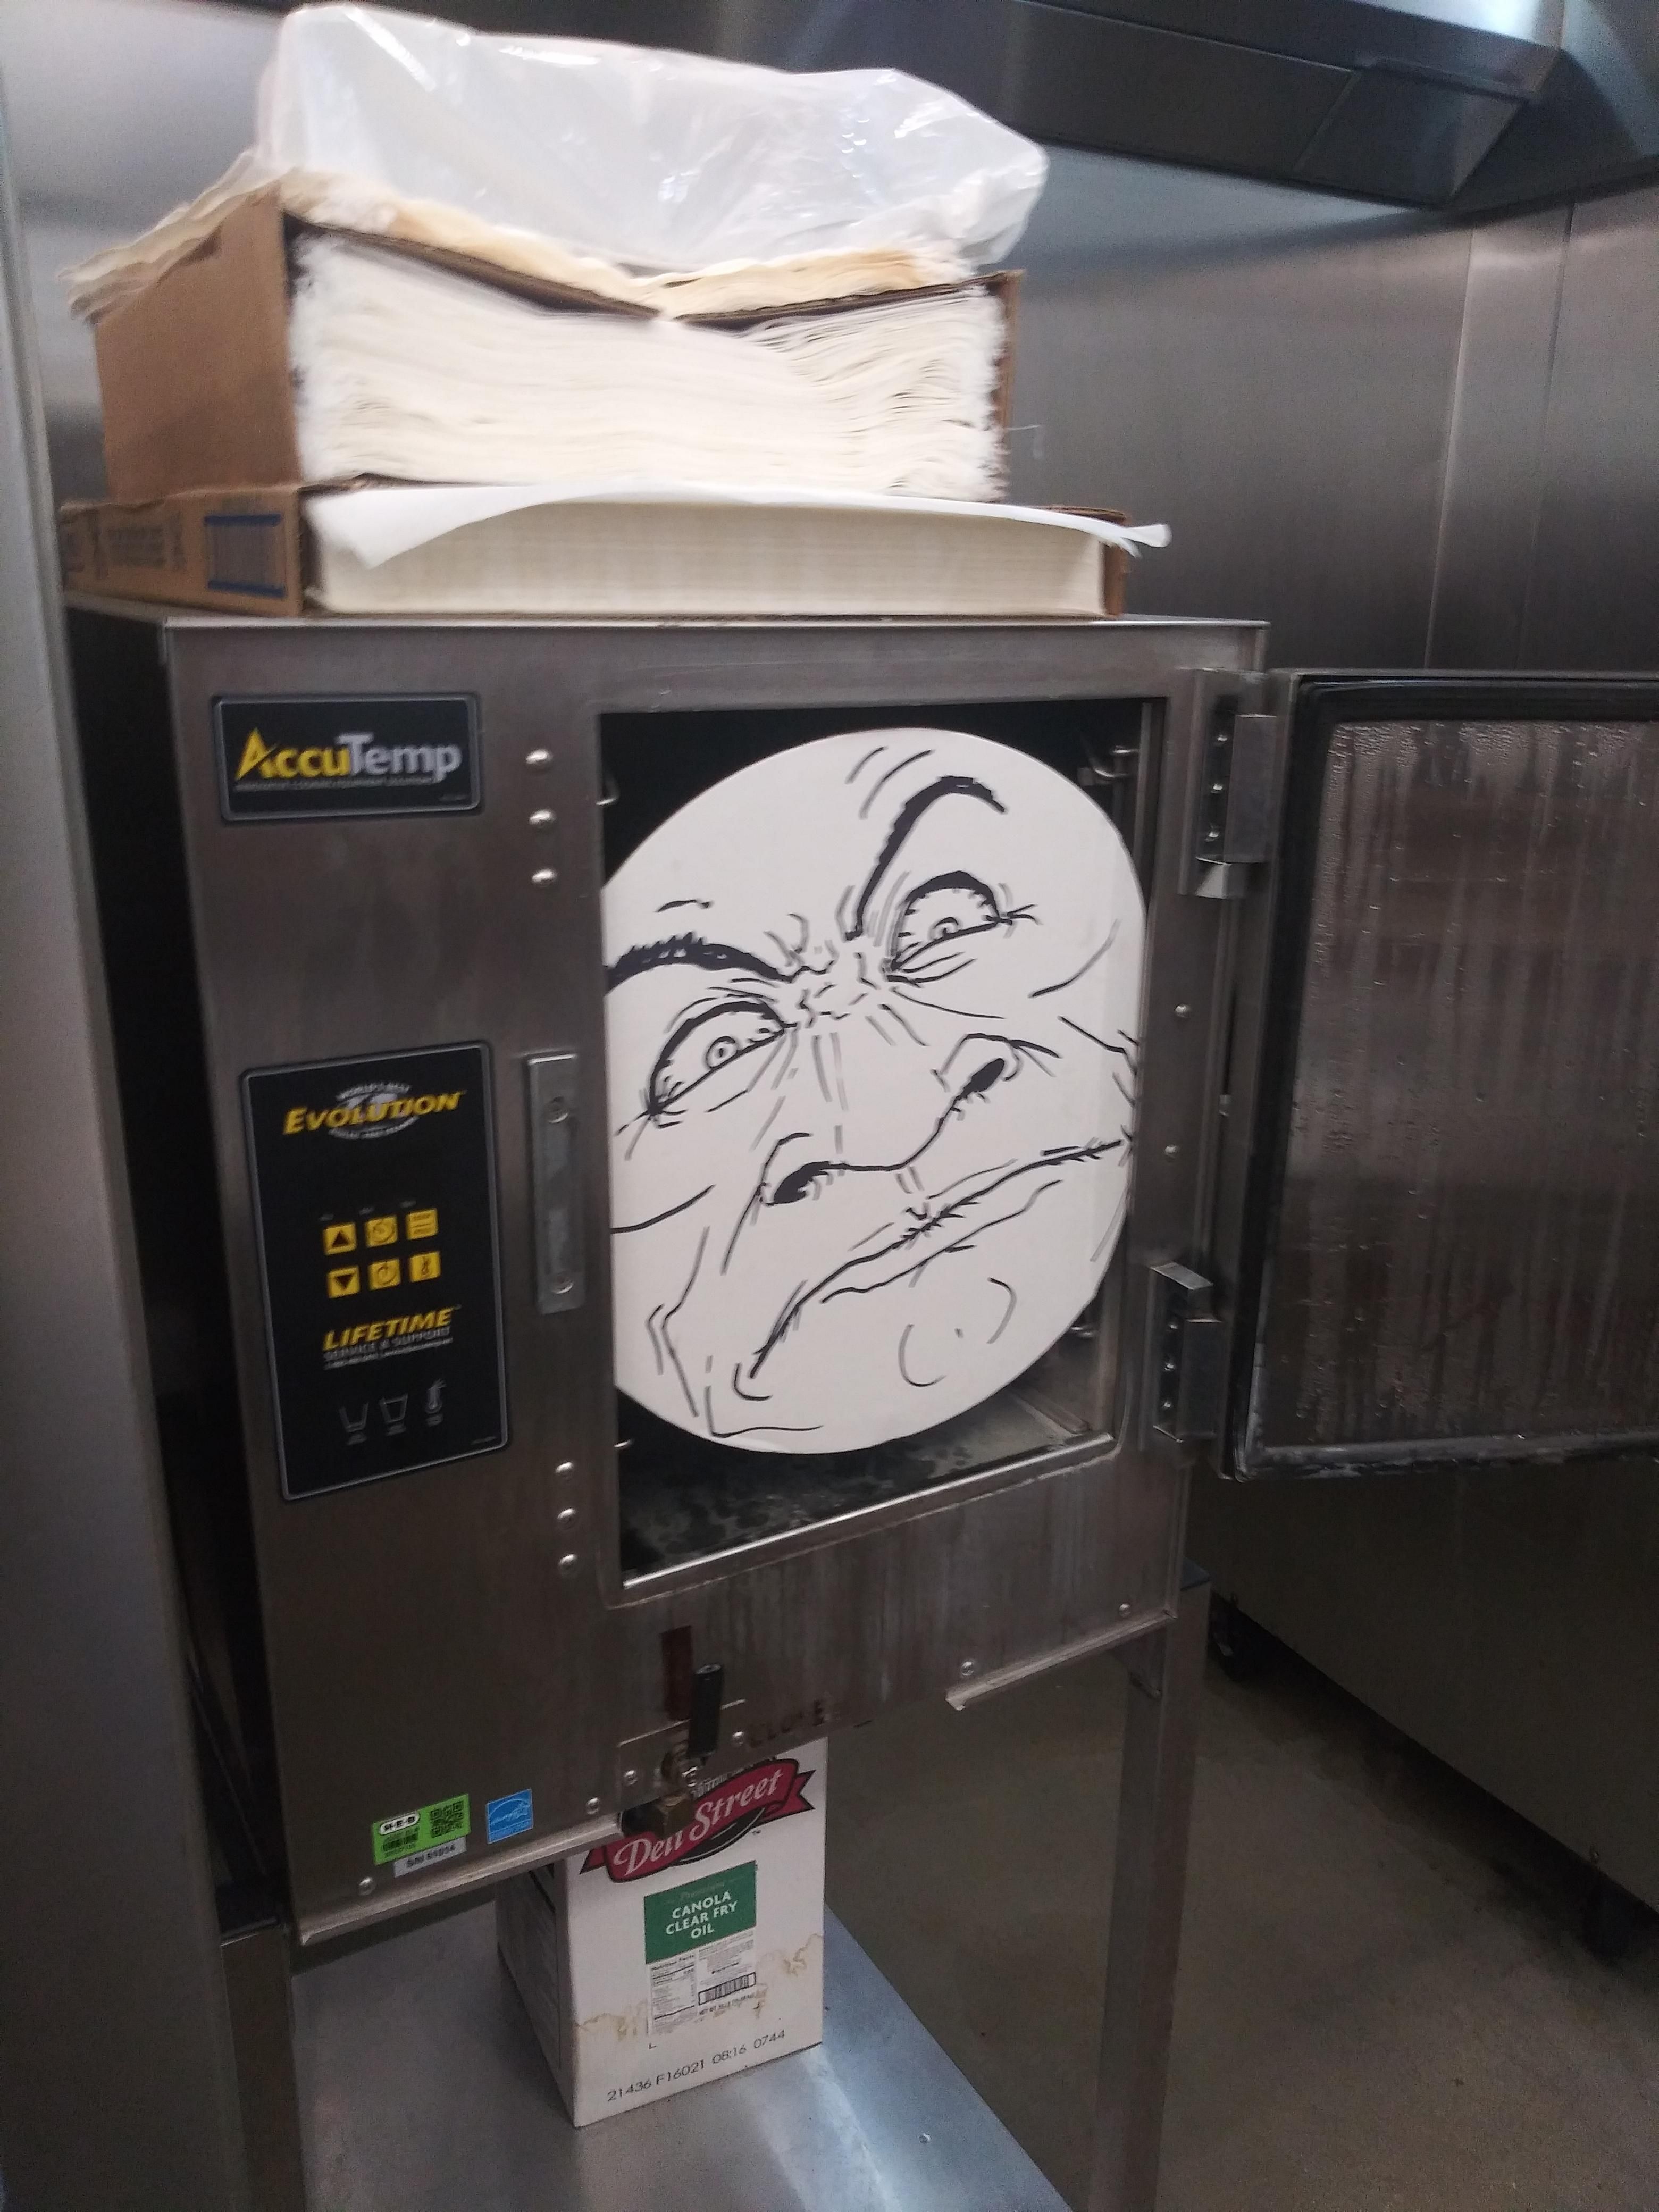 Left this in the steamer at work. Almost gave my boss a heart attack.